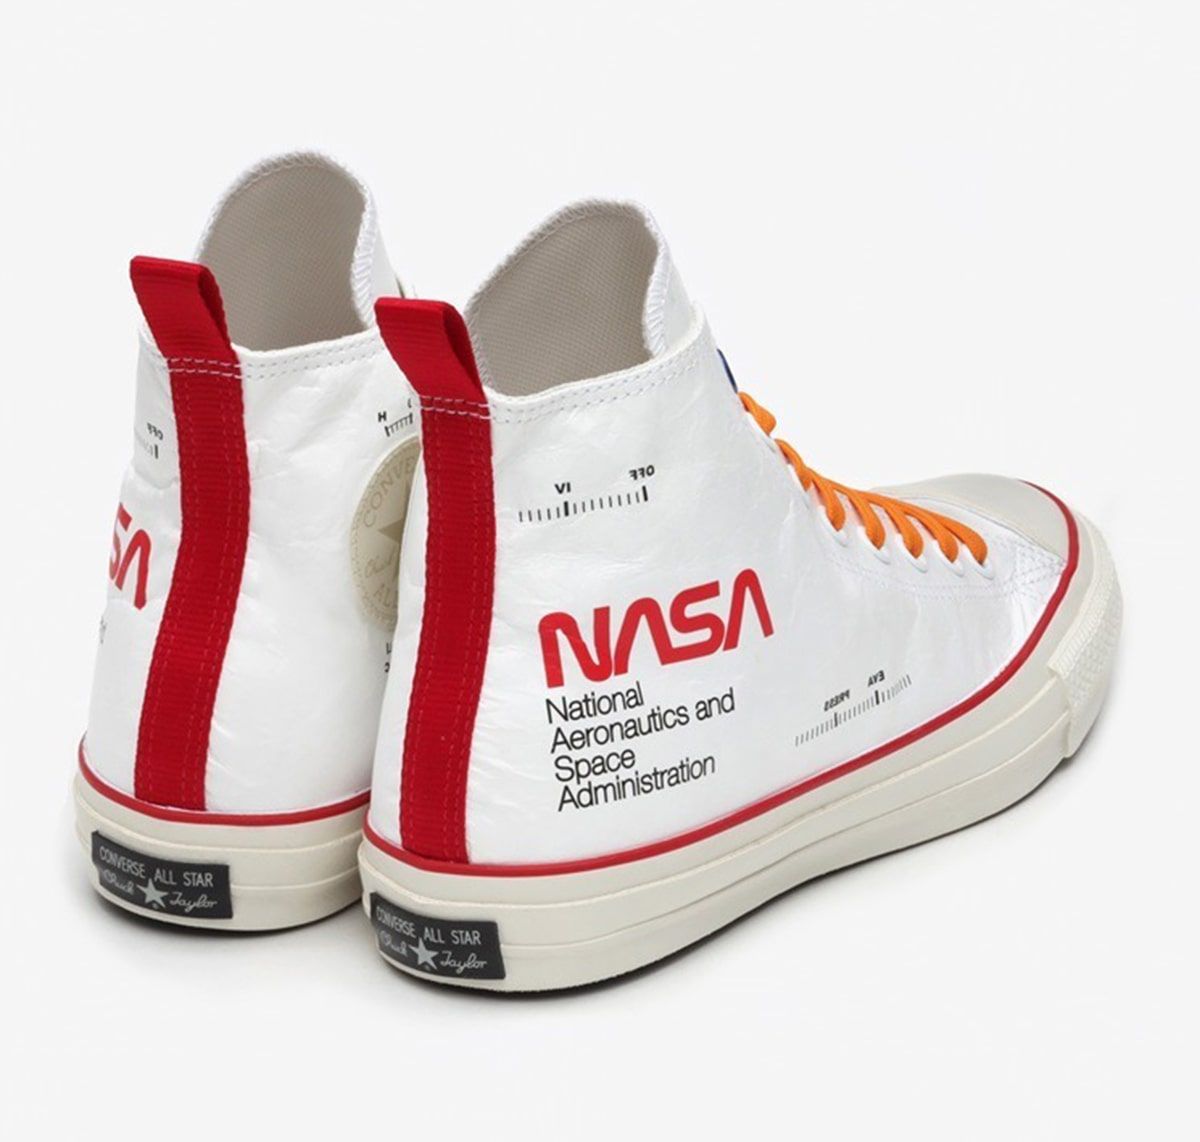 NASA x Converse Collection is Coming Soon | HOUSE OF HEAT